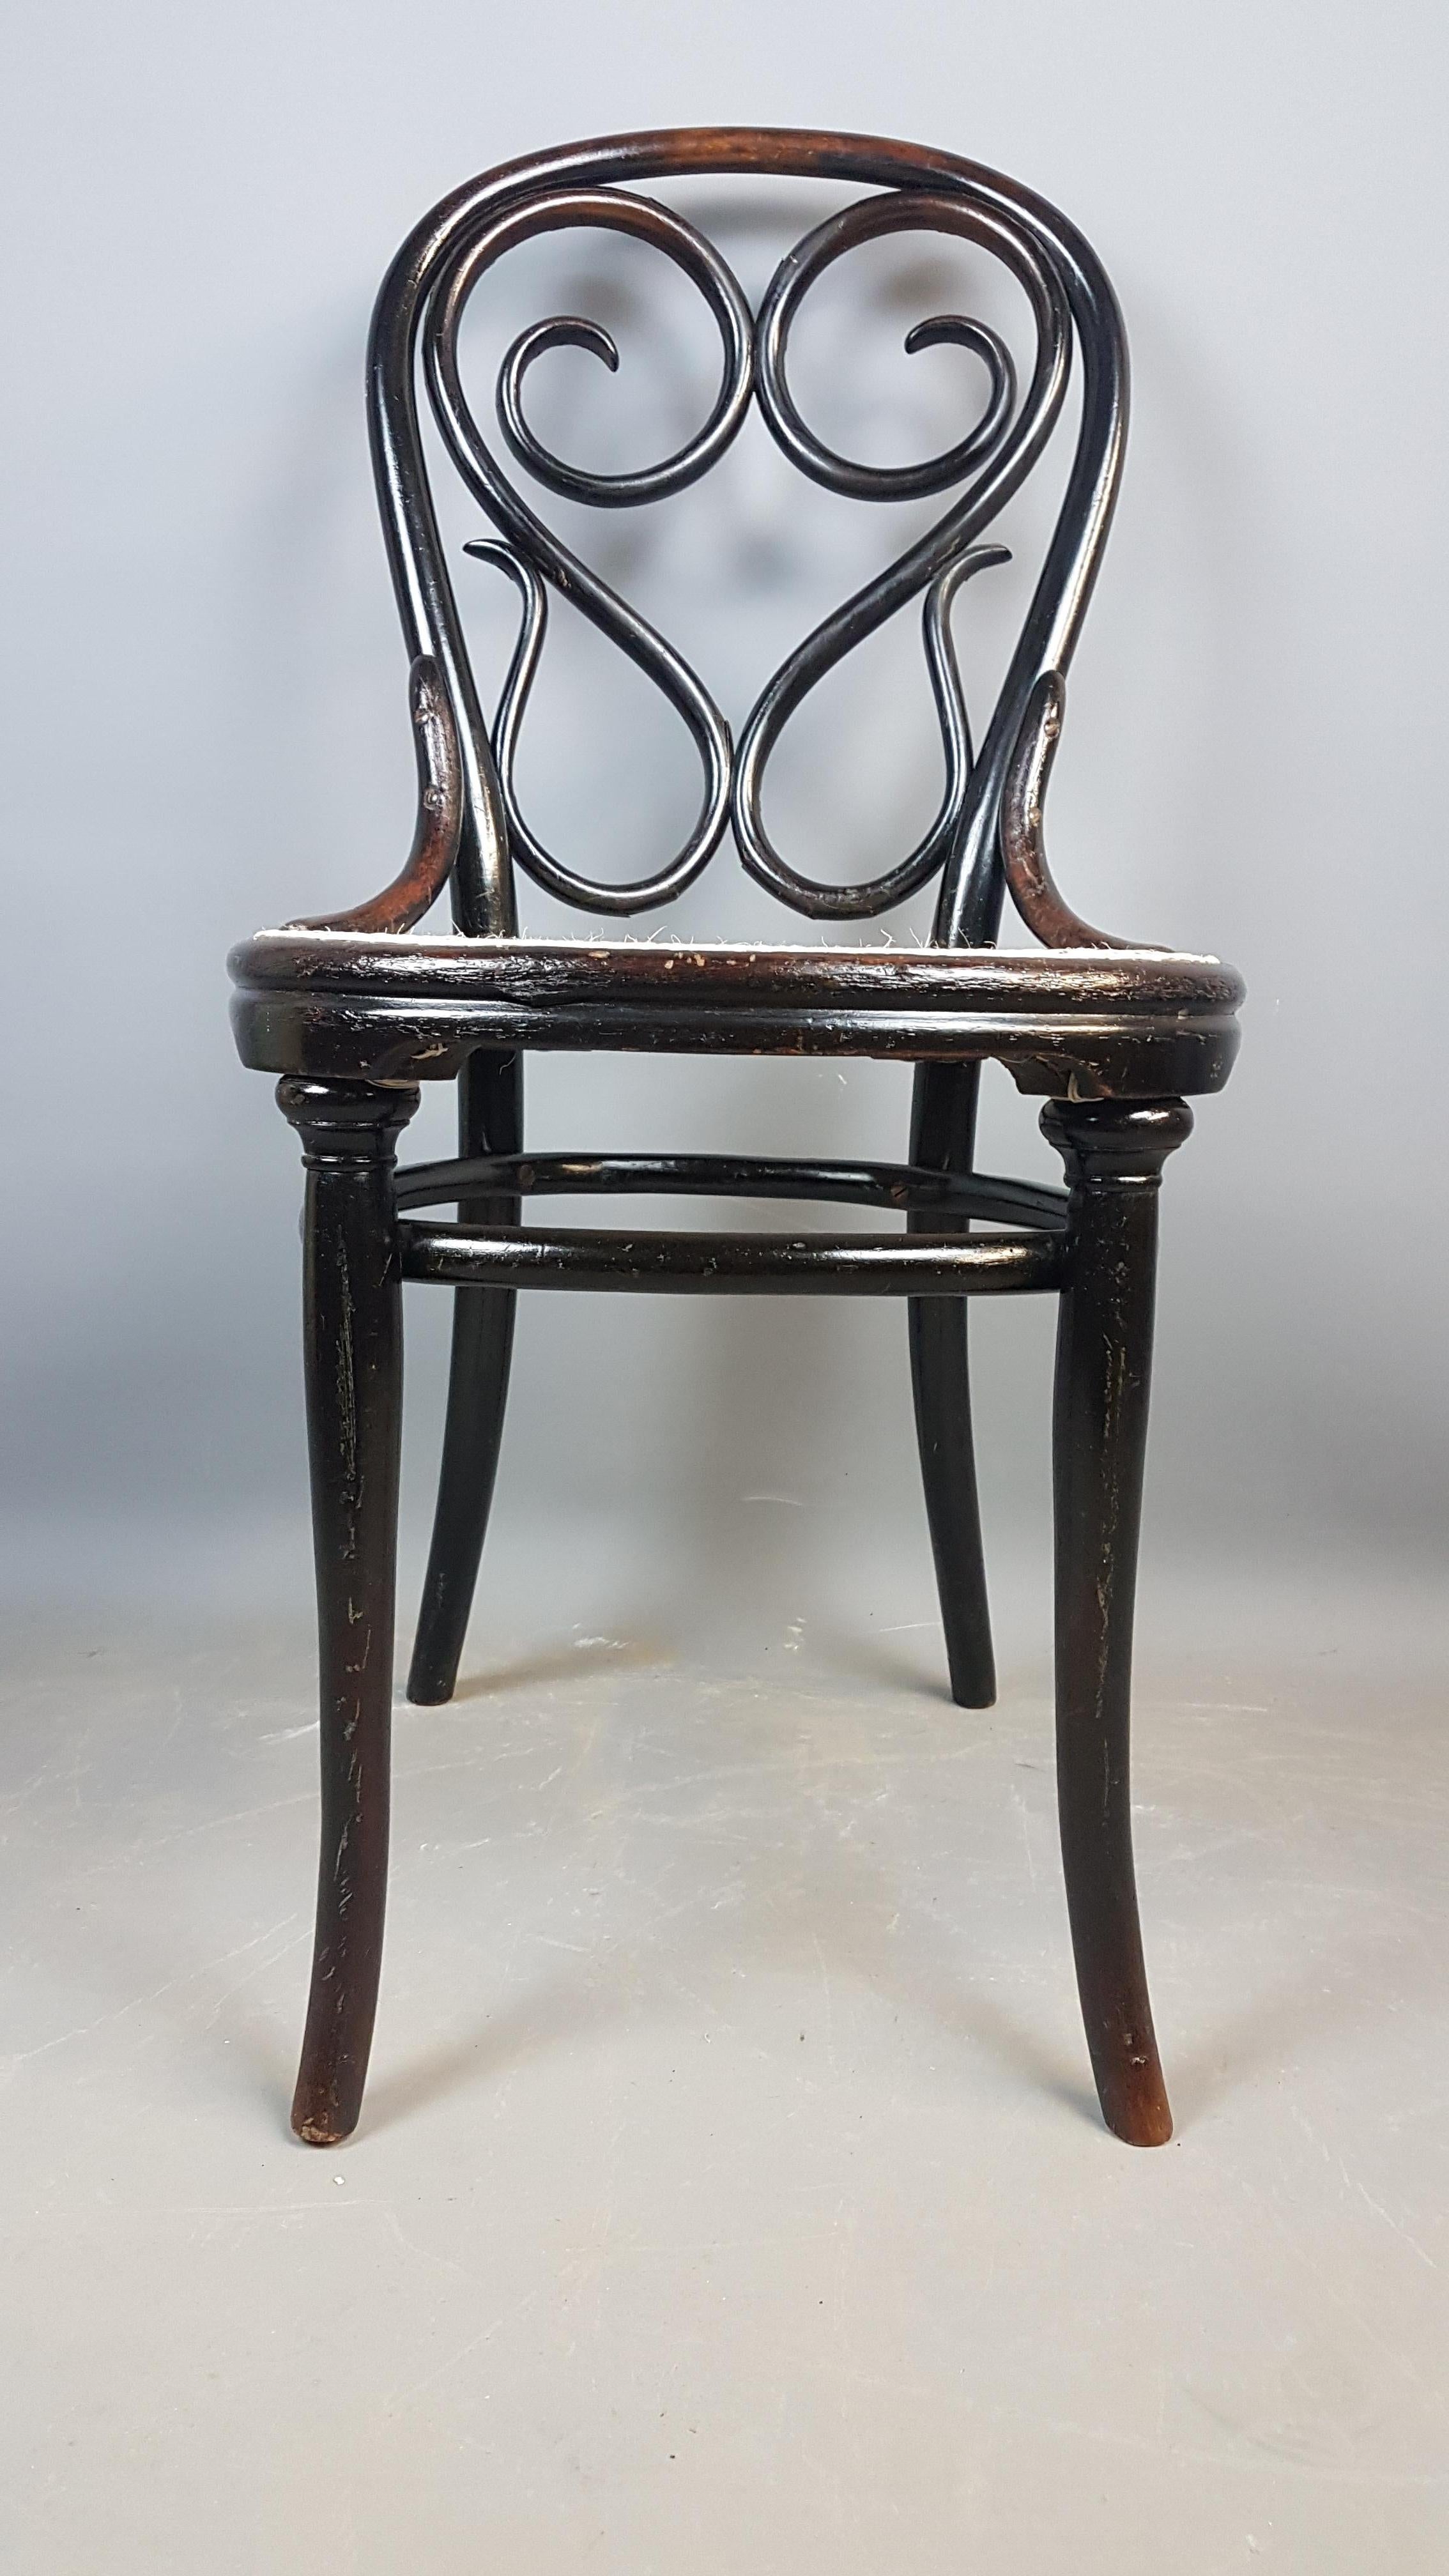 A good rare original example of this iconic bentwood chair from Michael Thonet, this one is model No.4 and is in good original condition with a few age cracks to the bentwood back and marks to the original ebonized finish. This one has been freshly